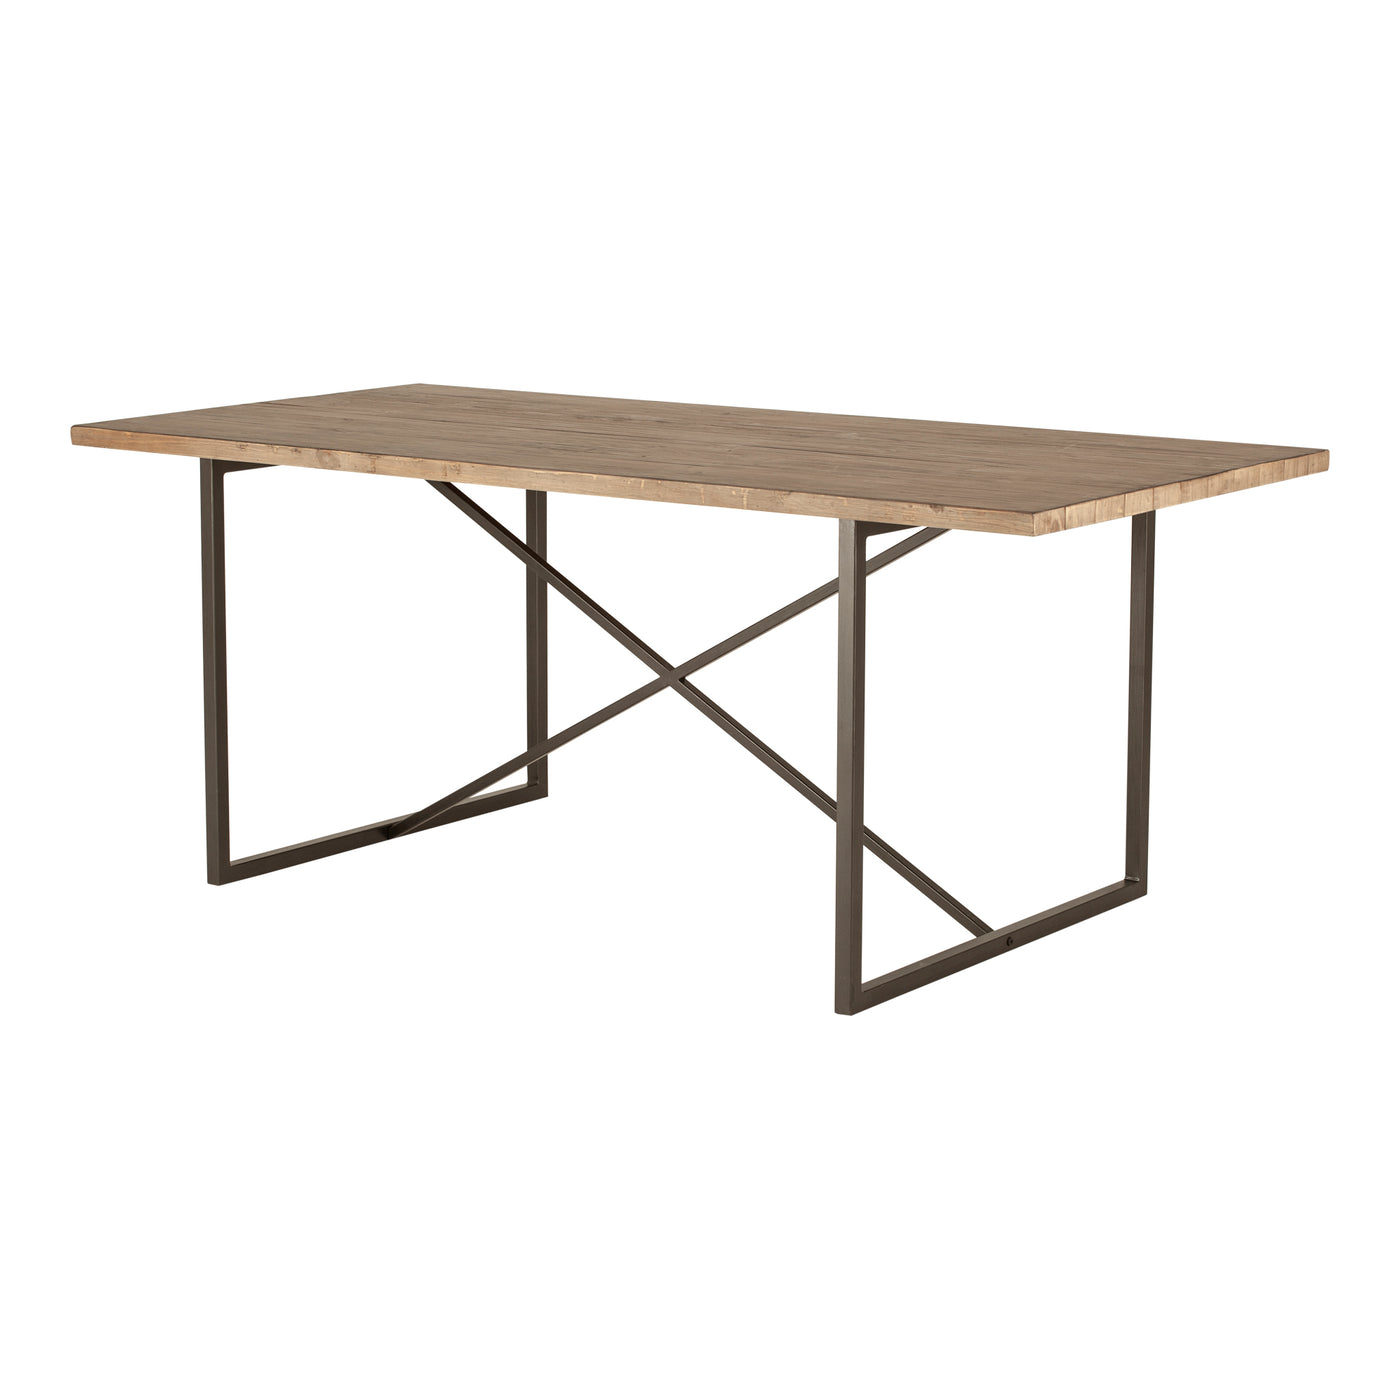 An airy metal base gives the Sierra Dining Table an industrial look. Finished with a solid reclaimed pine tabletop, this t...